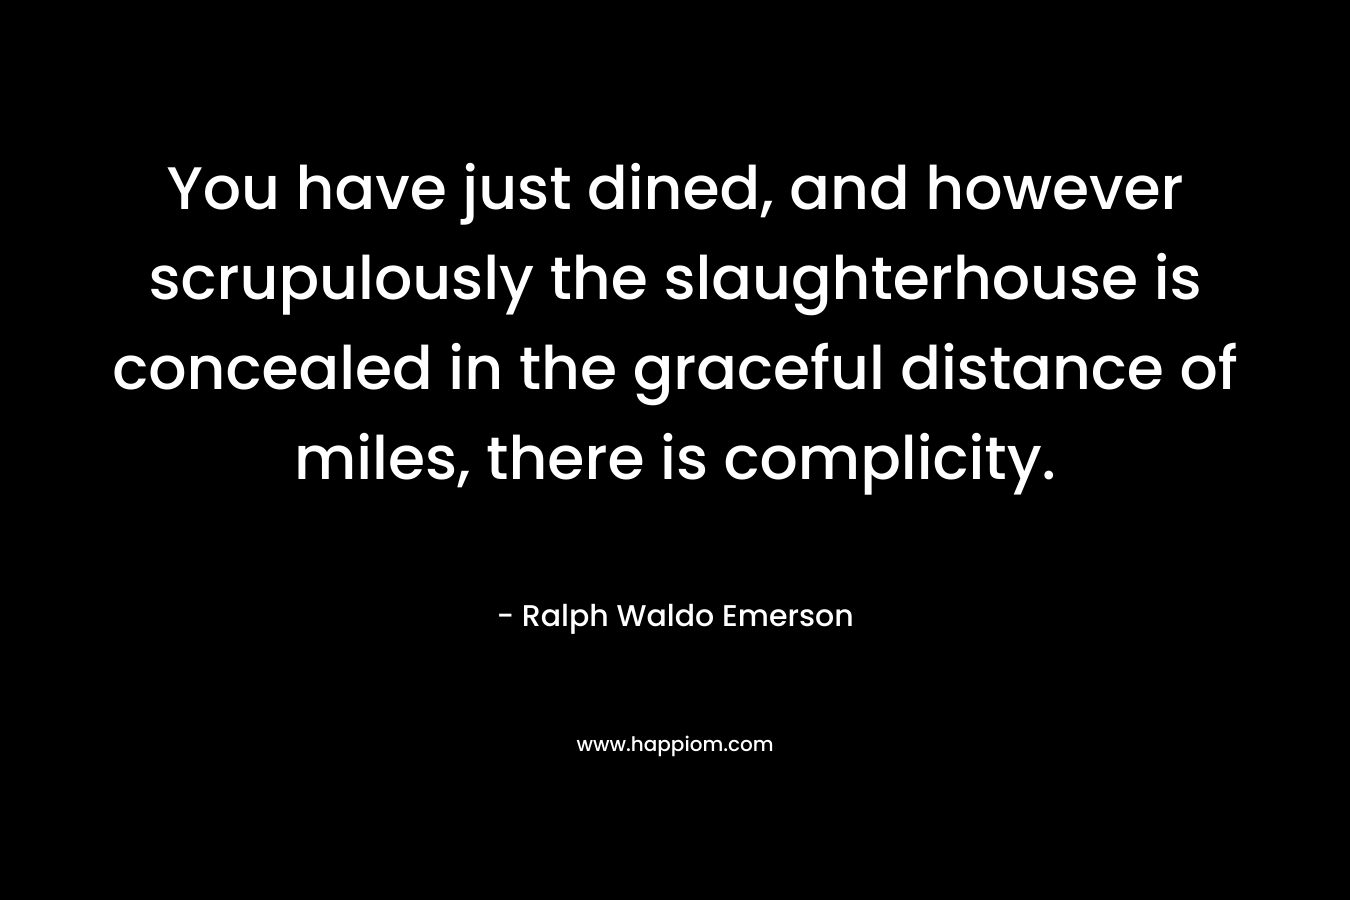 You have just dined, and however scrupulously the slaughterhouse is concealed in the graceful distance of miles, there is complicity.